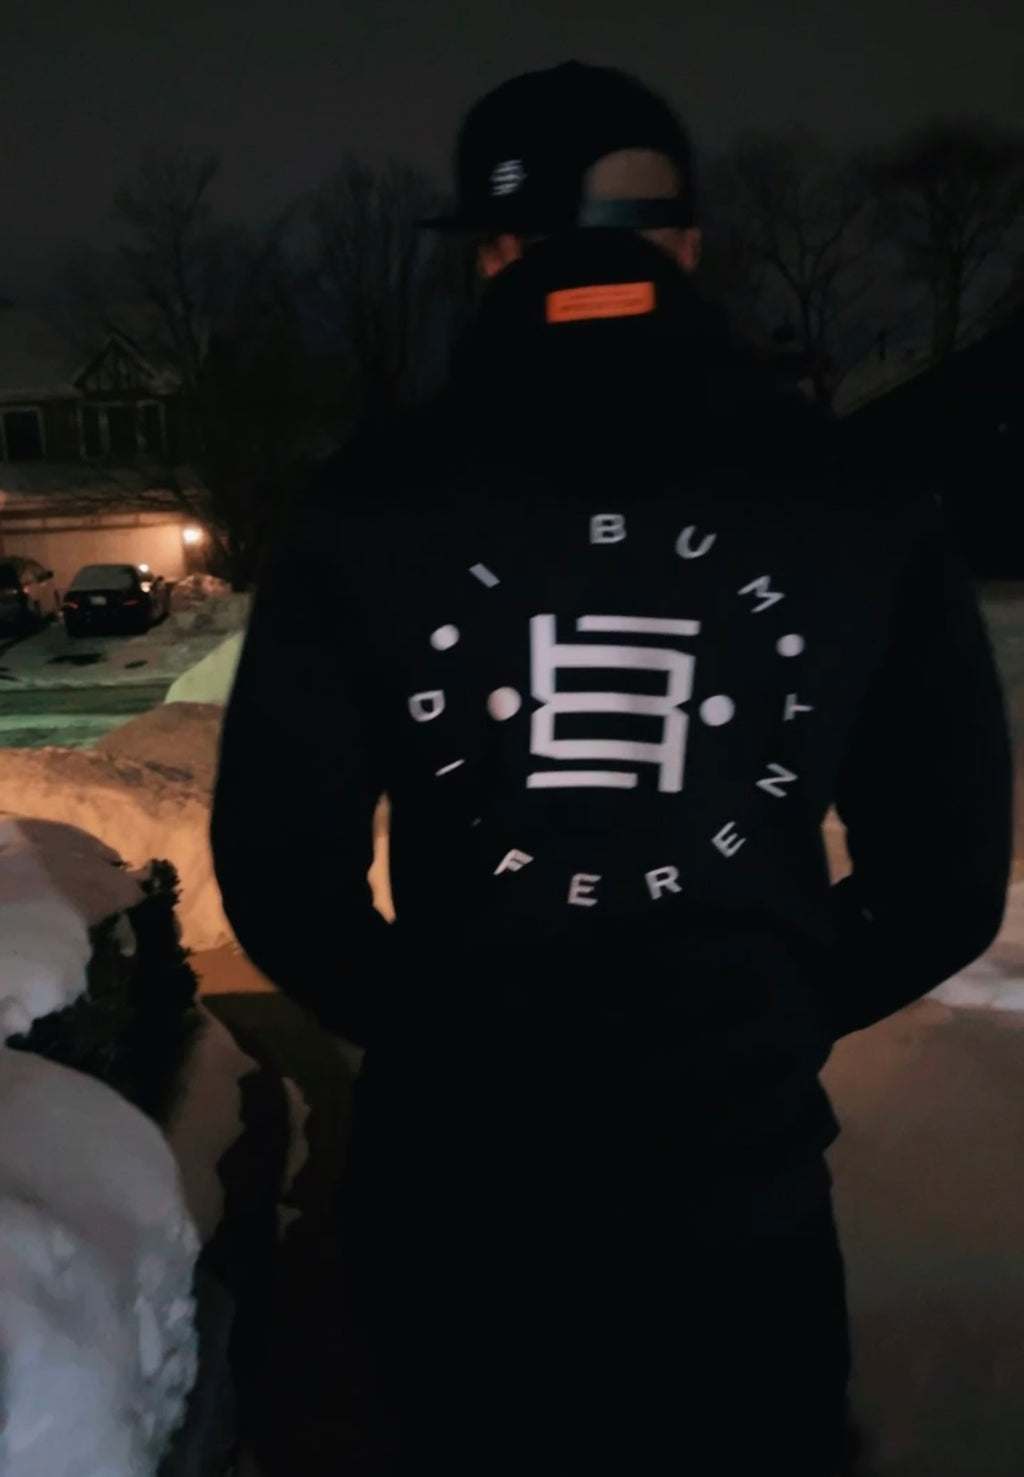 Fly a** bum “Ghost” reflective hoodie